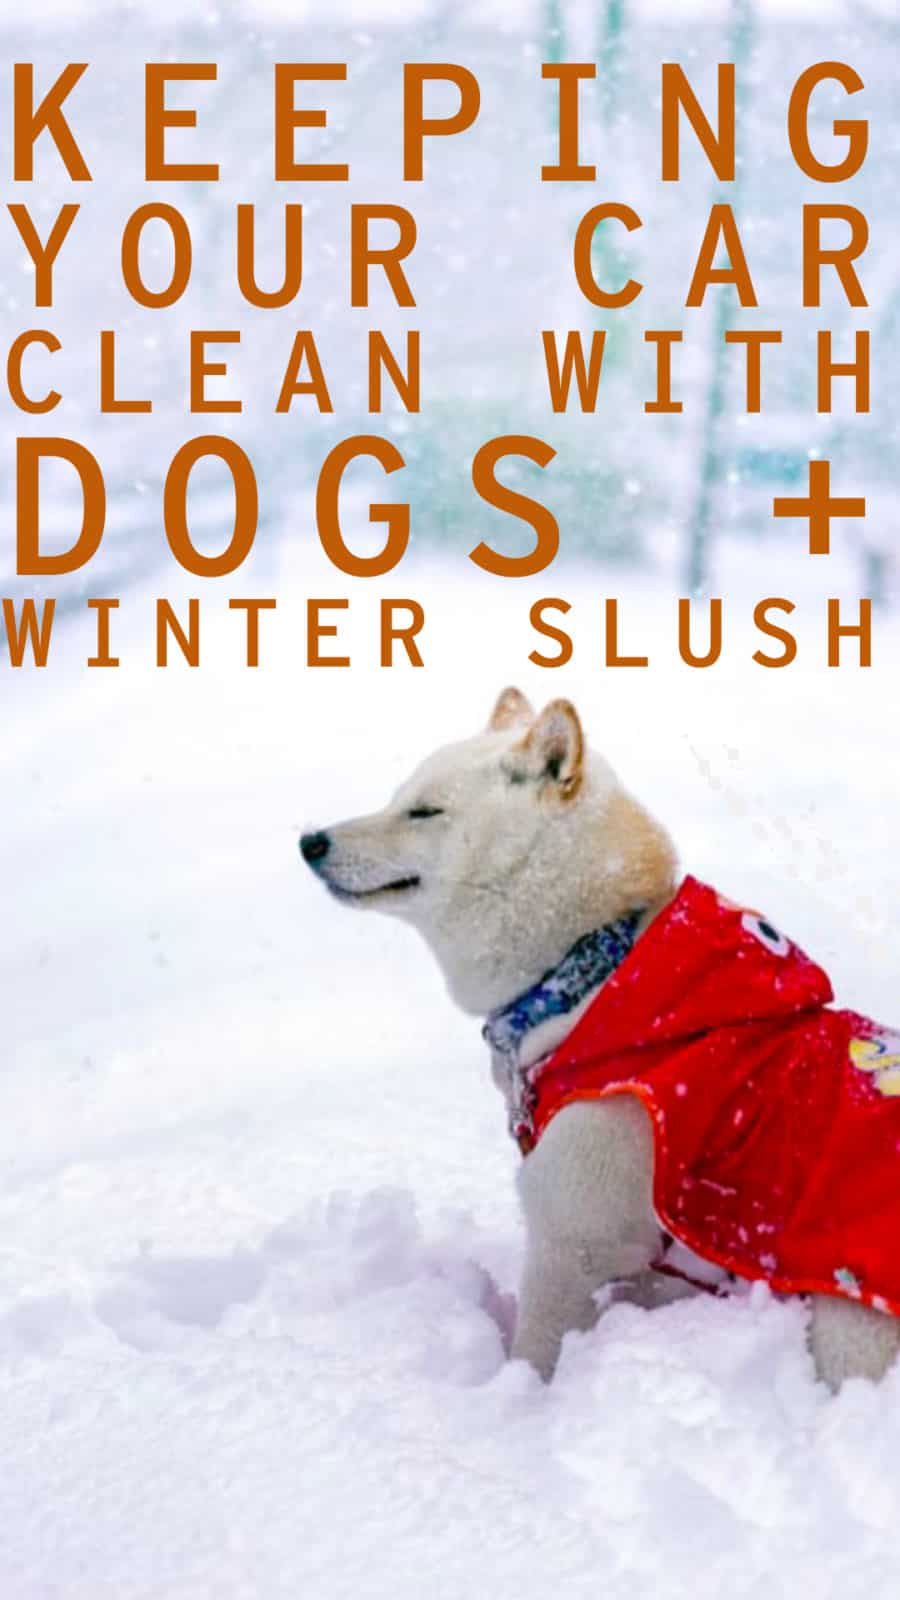 Dogs + Winter Slush: How to Keep Your Car Clean